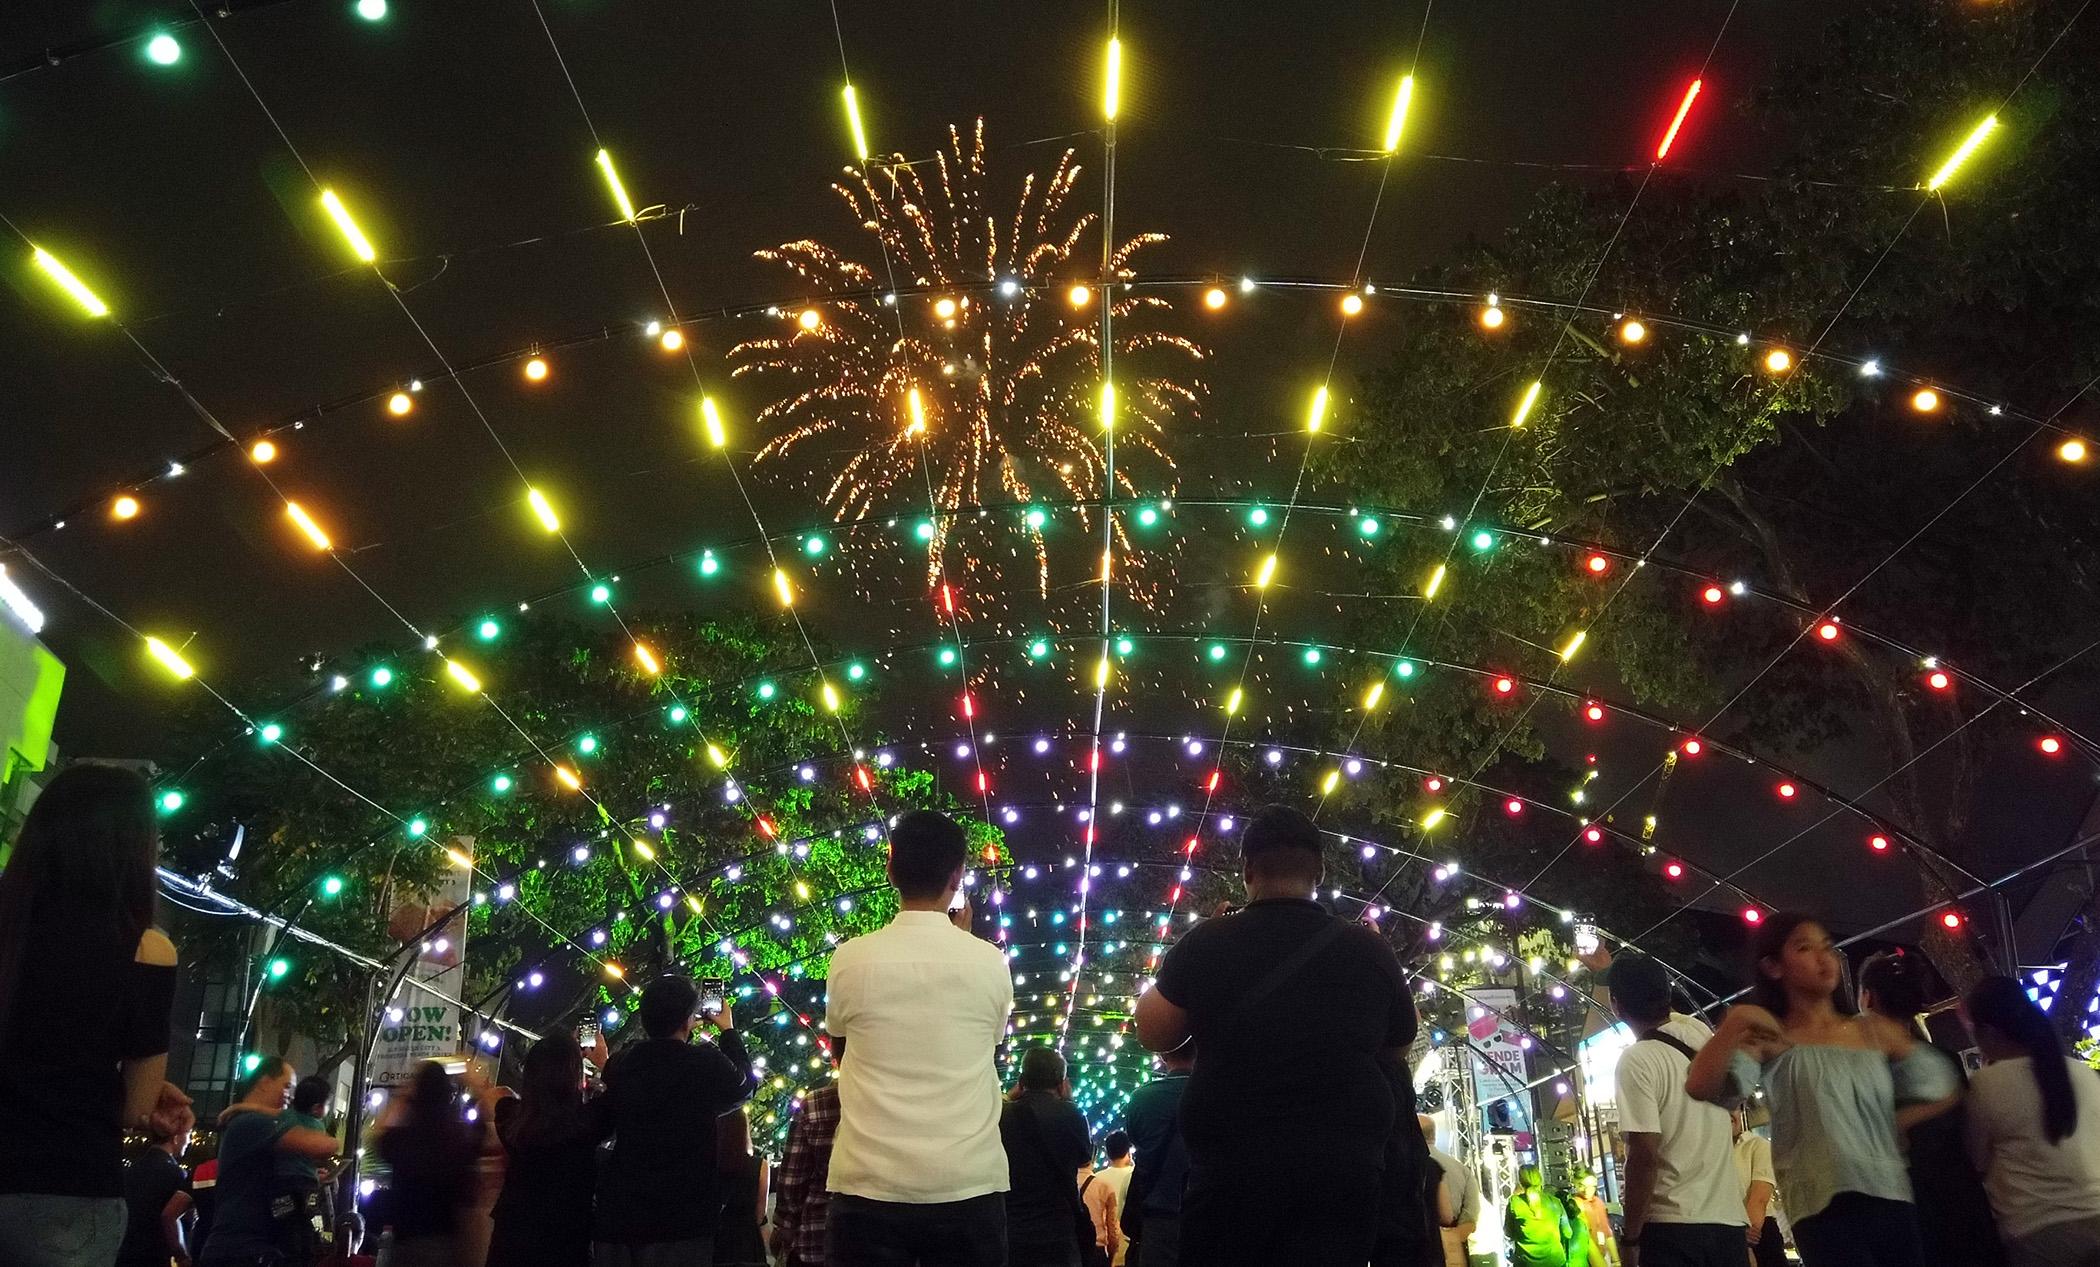 These 11 festive places in Metro Manila will make you feel the